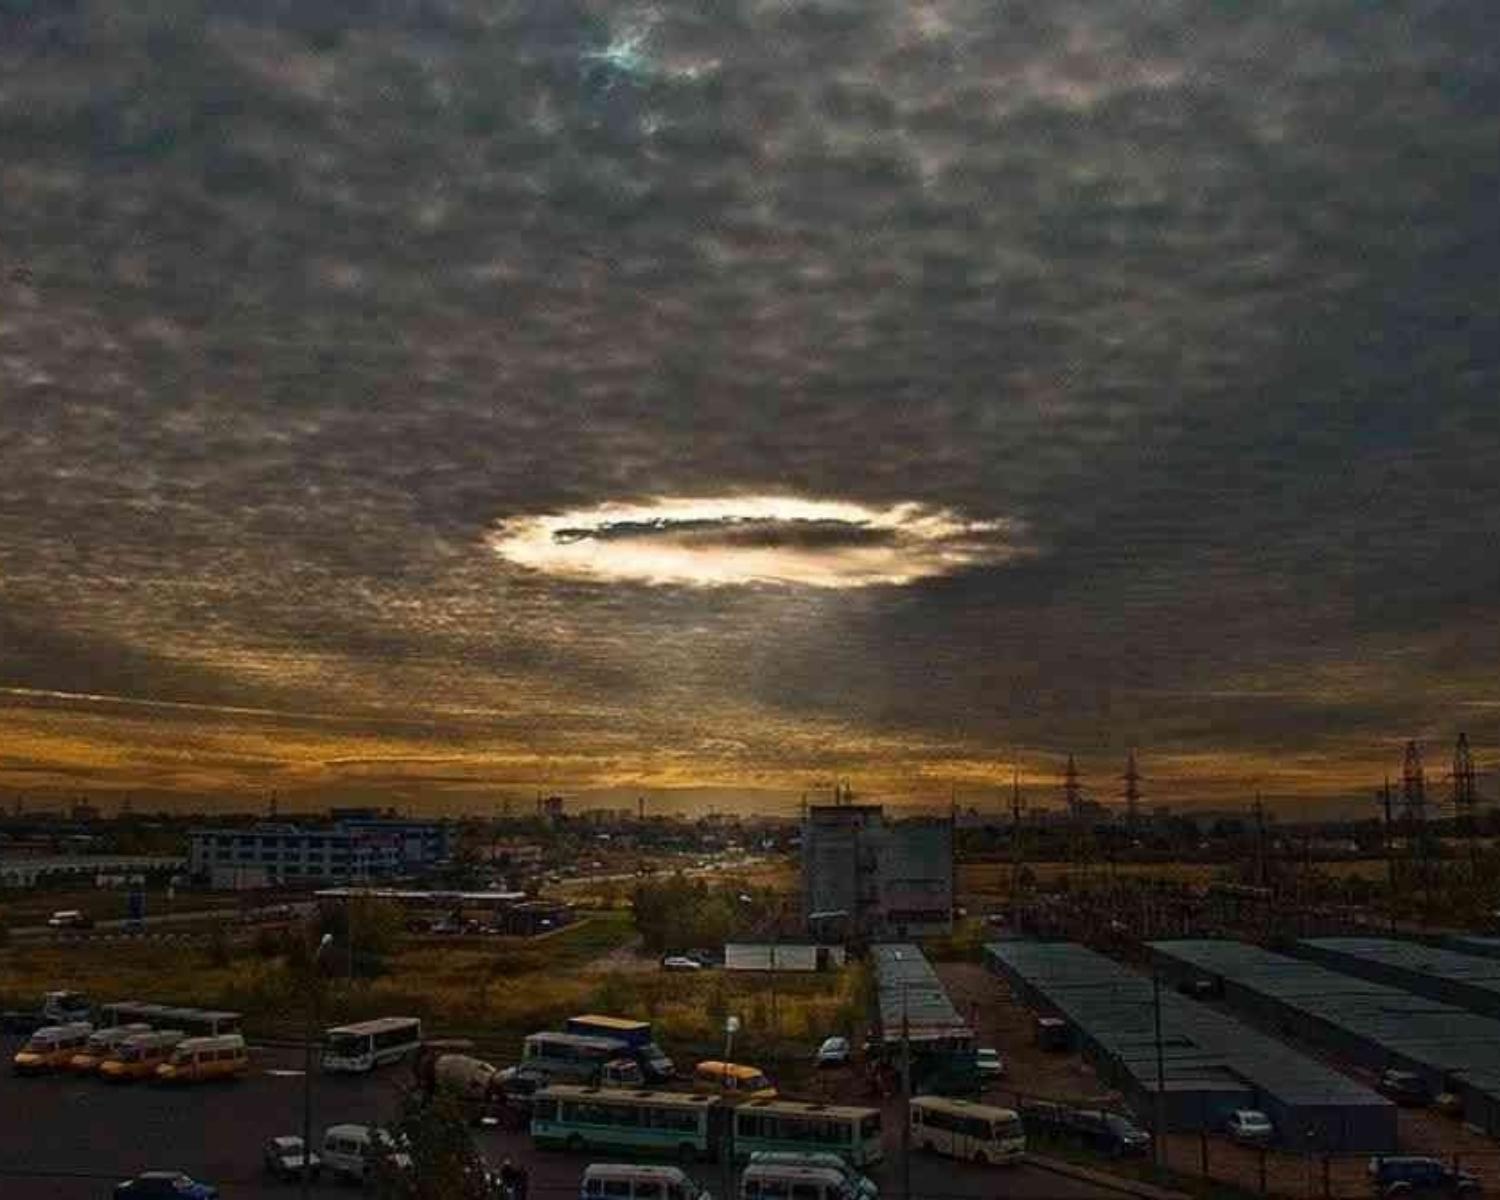 3. The 'Skypunch' phenomena that dents the clouds in the most perfect way.